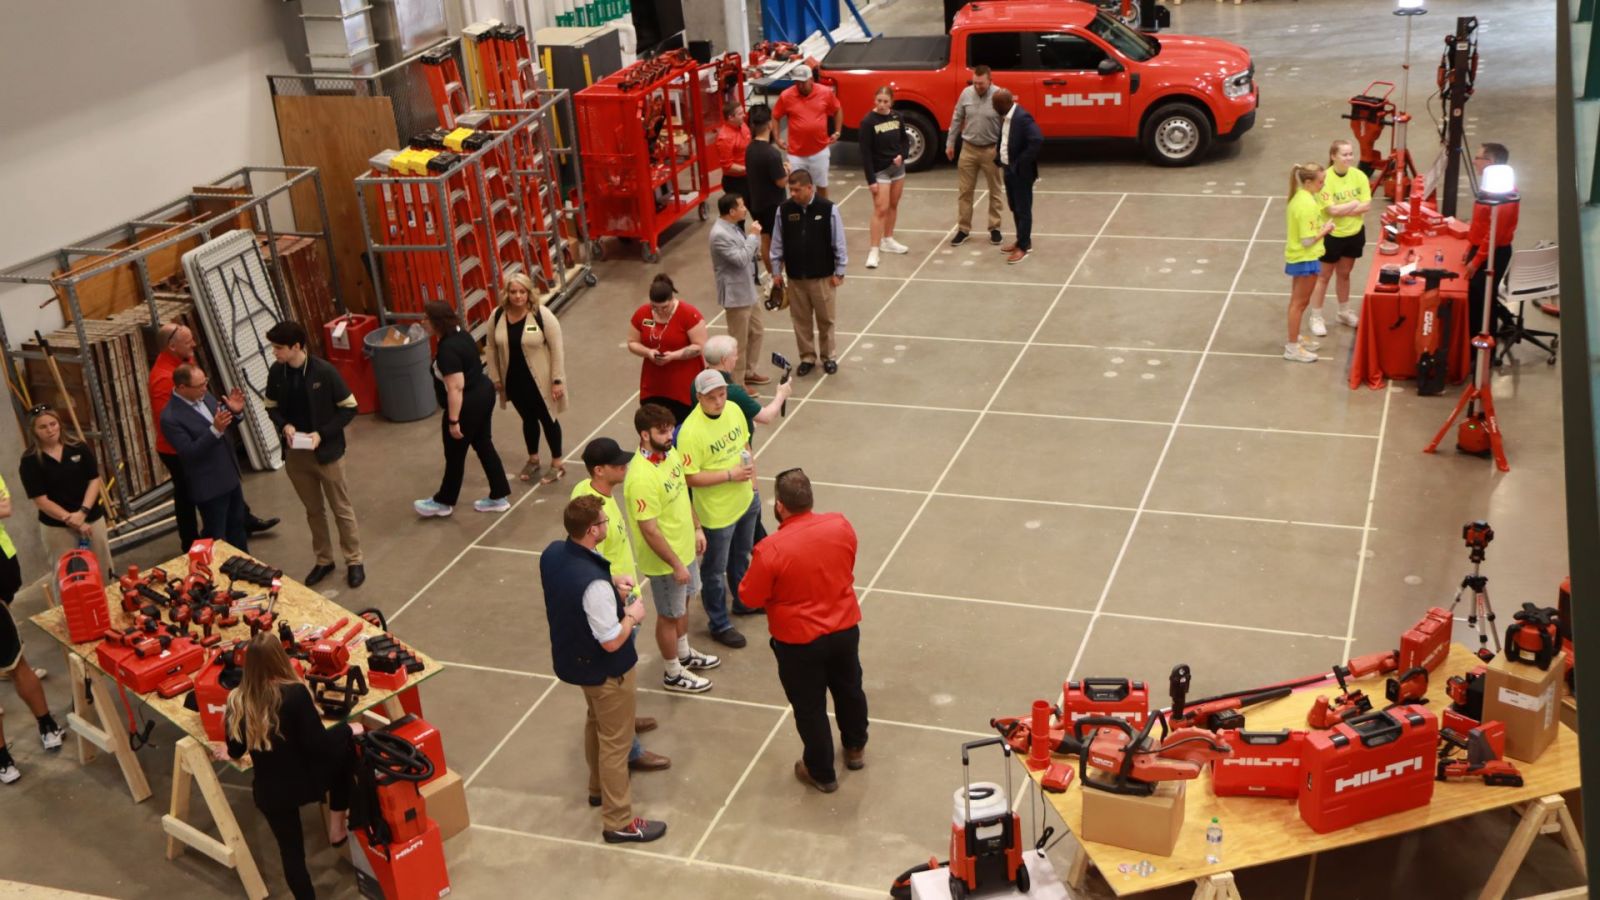 Attendees at the Hilti event gather in Dudley Hall's construction lab. (Purdue University photo/Zach Rodimel)